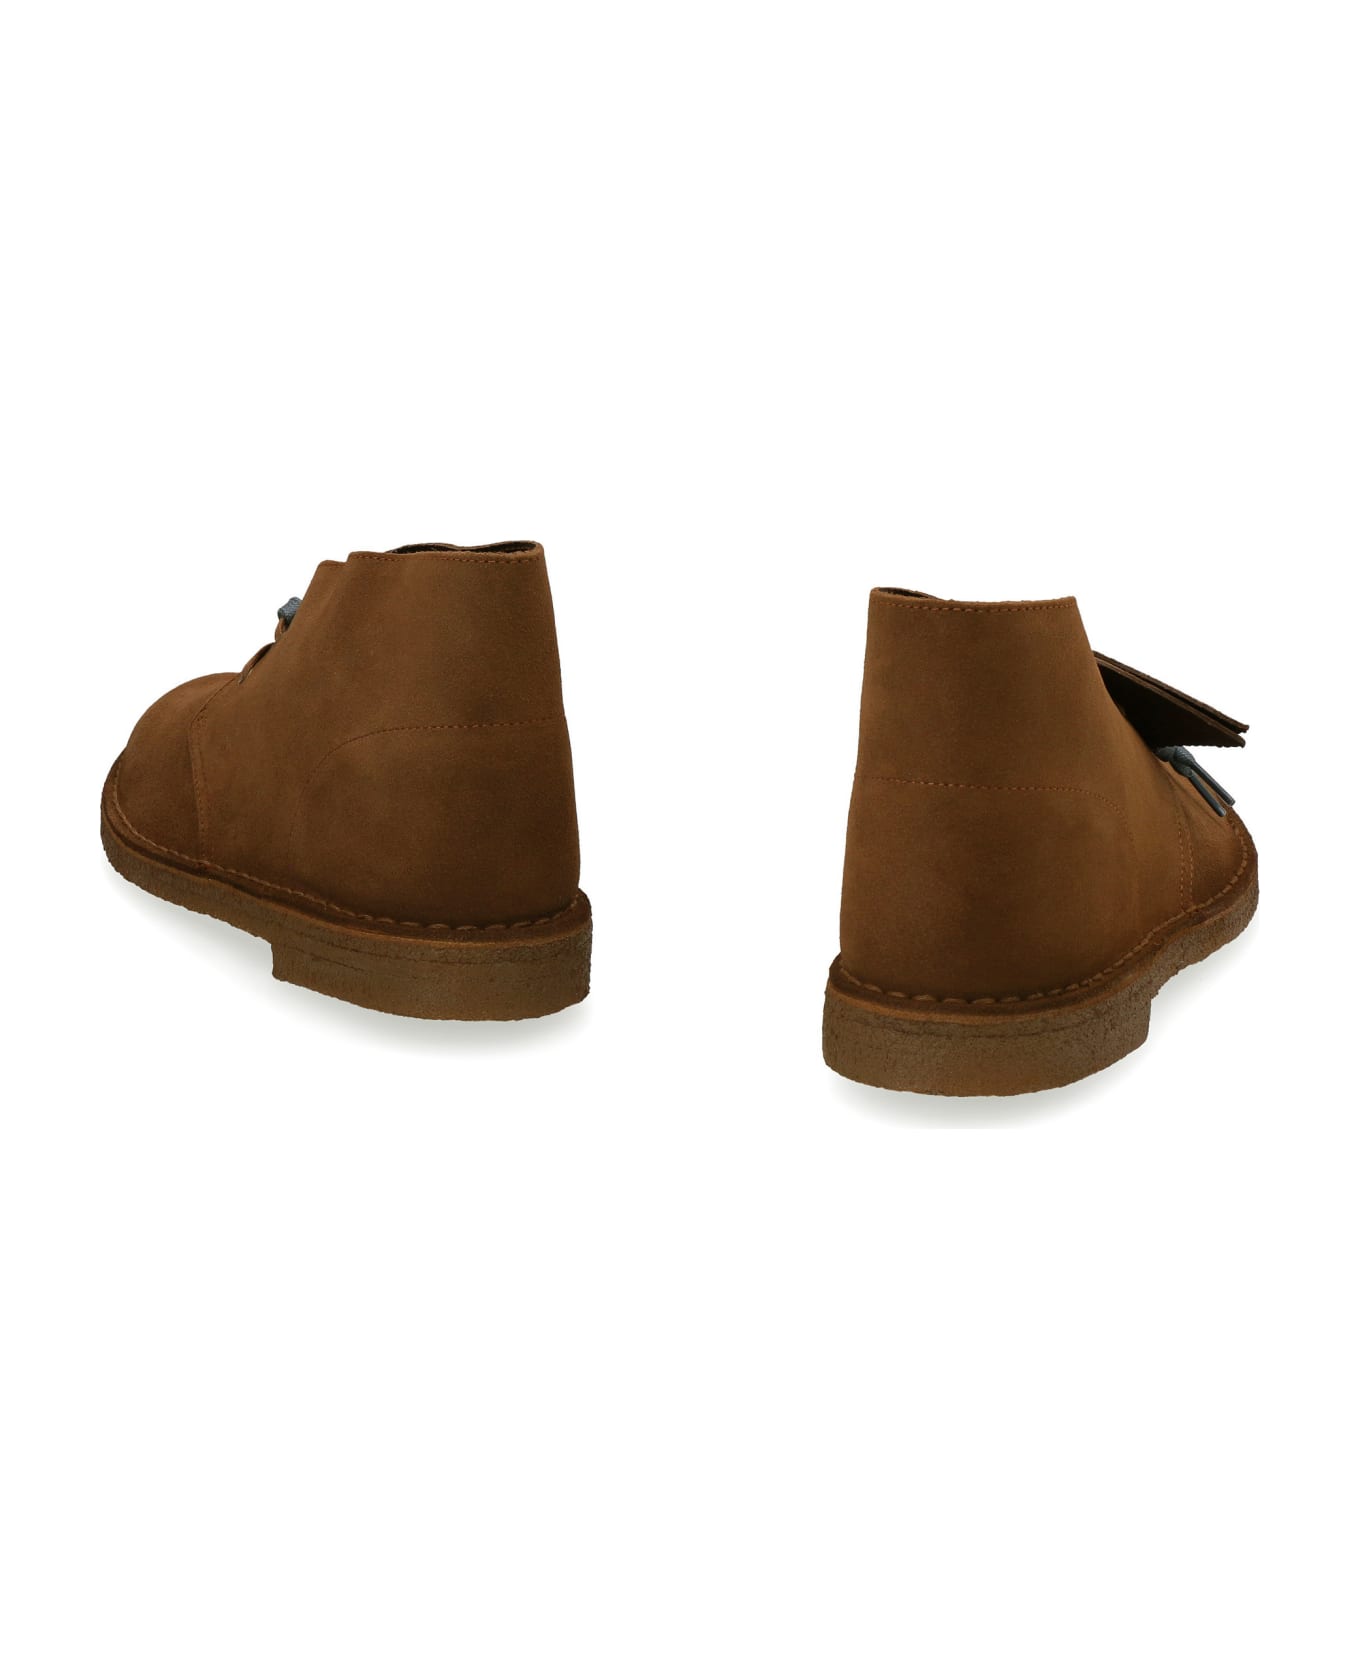 Clarks Suede Desert Boots - Saddle Brown ローファー＆デッキシューズ